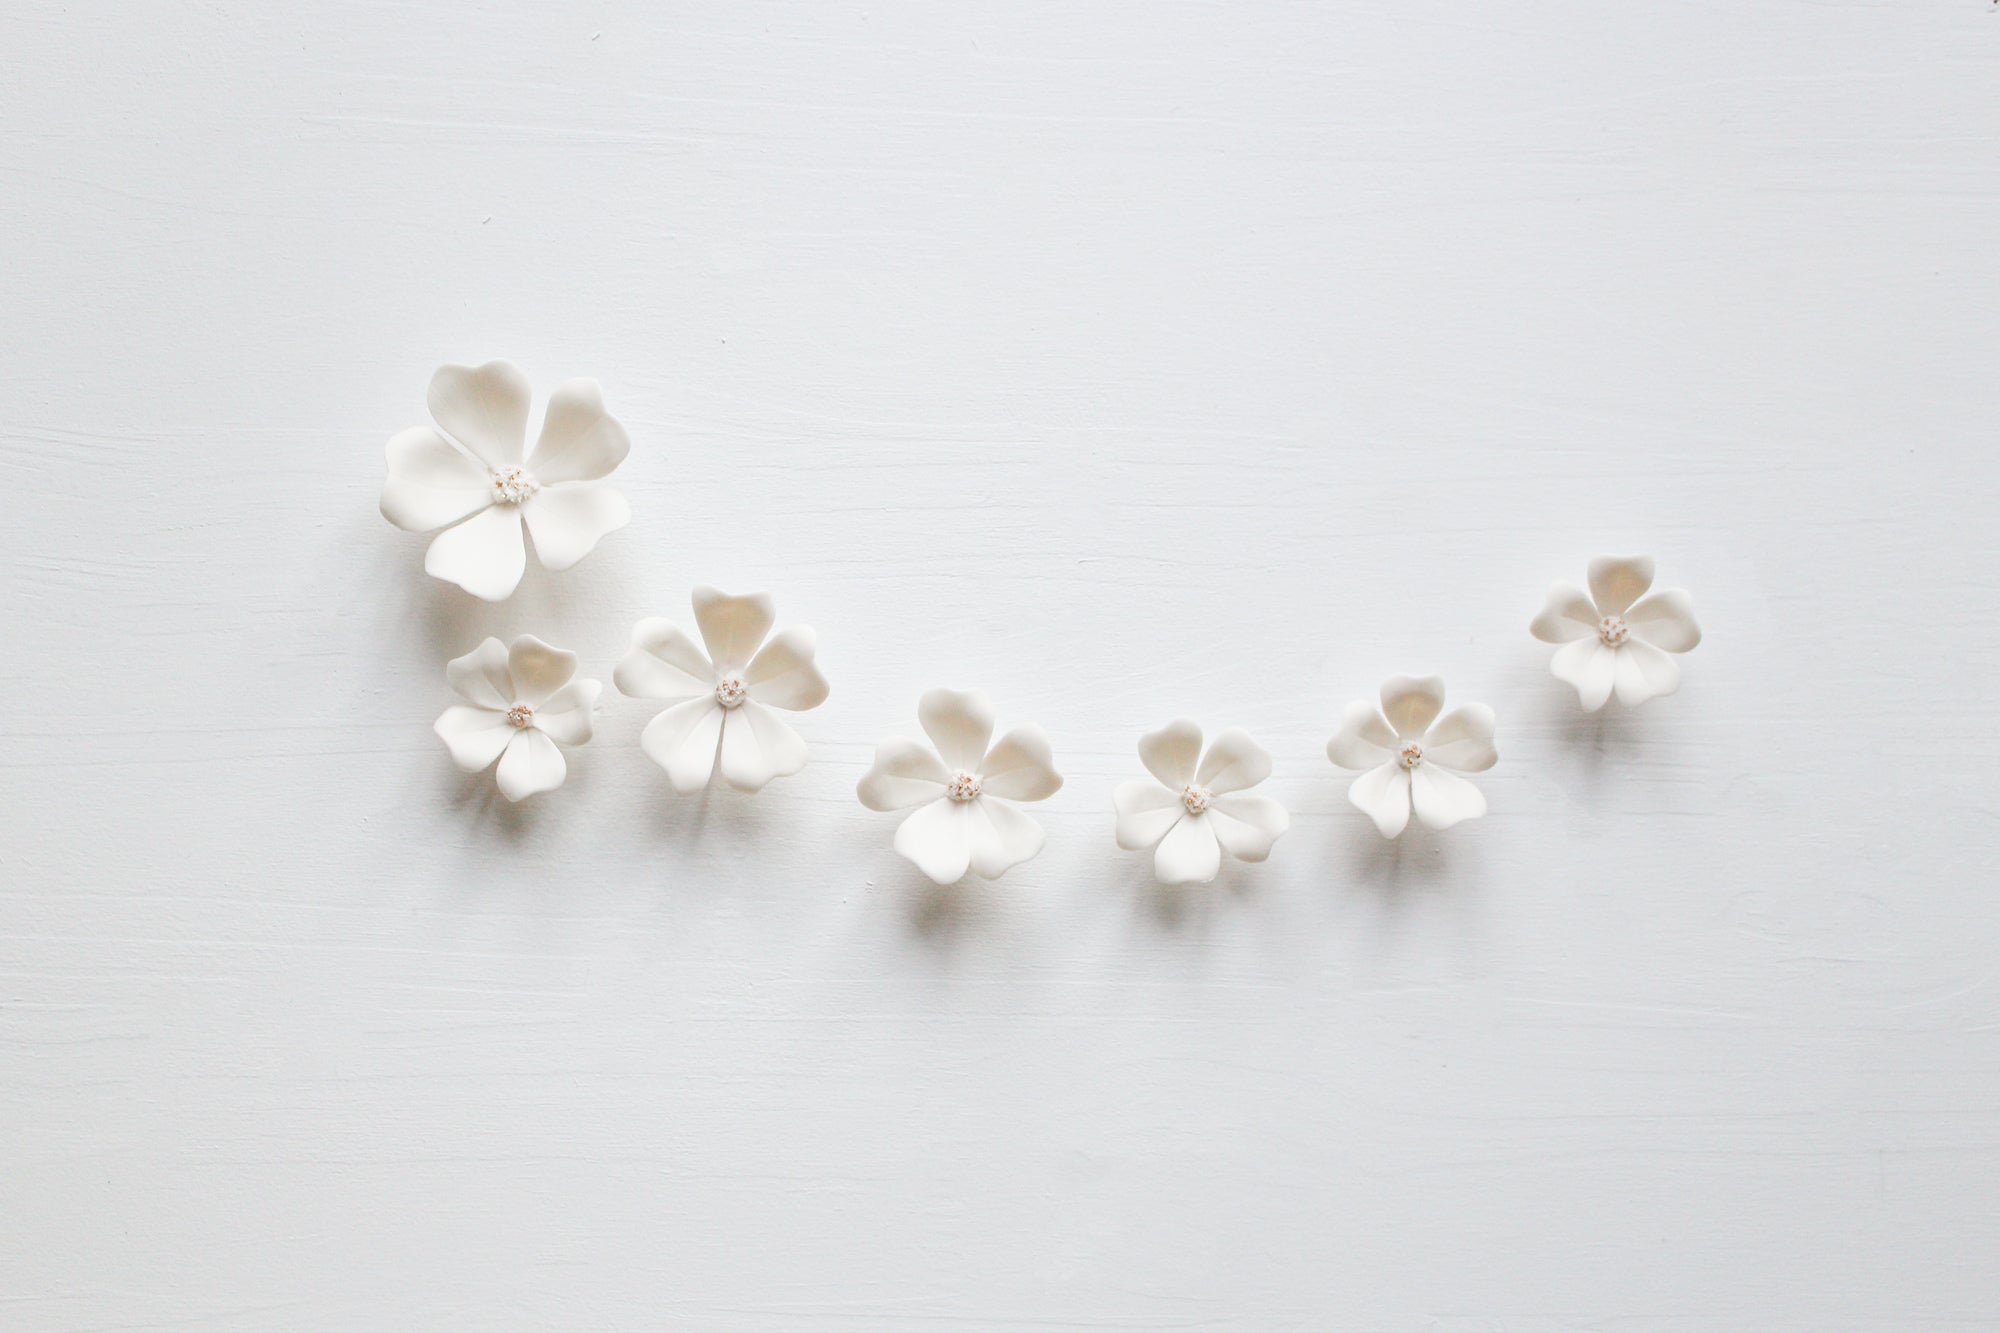 Wall Decor of Porcelain Flowers by Alain Granell